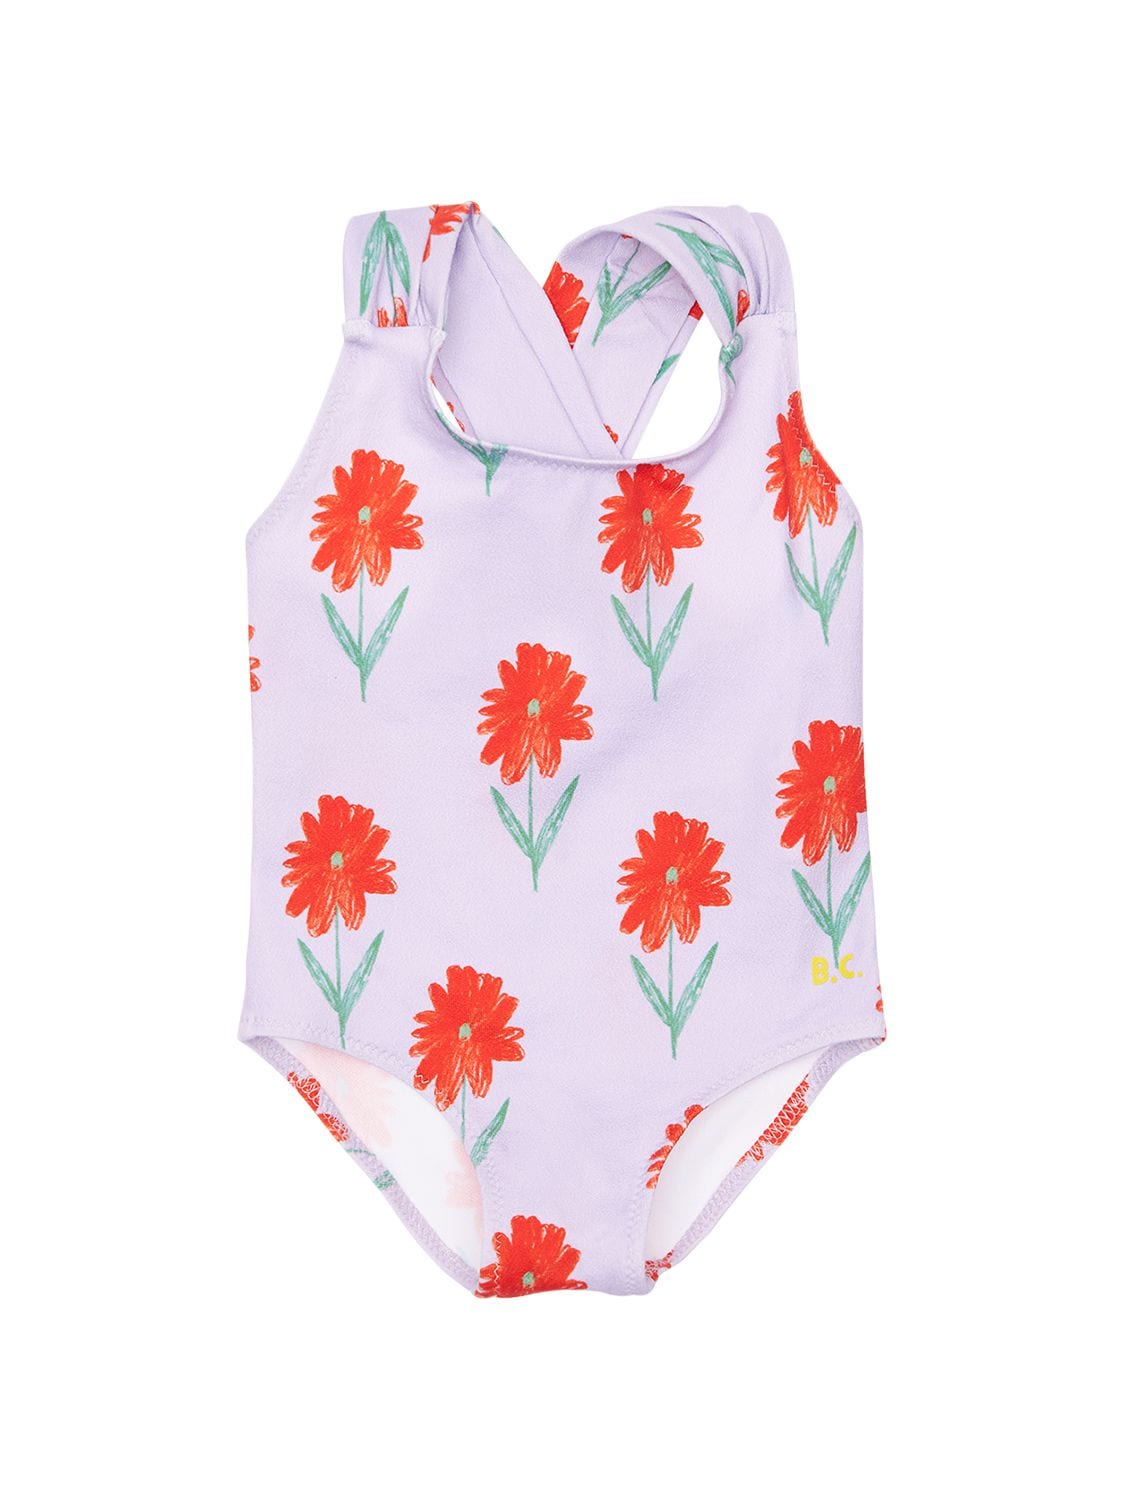 BOBO CHOSES PRINTED RECYCLED ONE PIECE SWIMSUIT